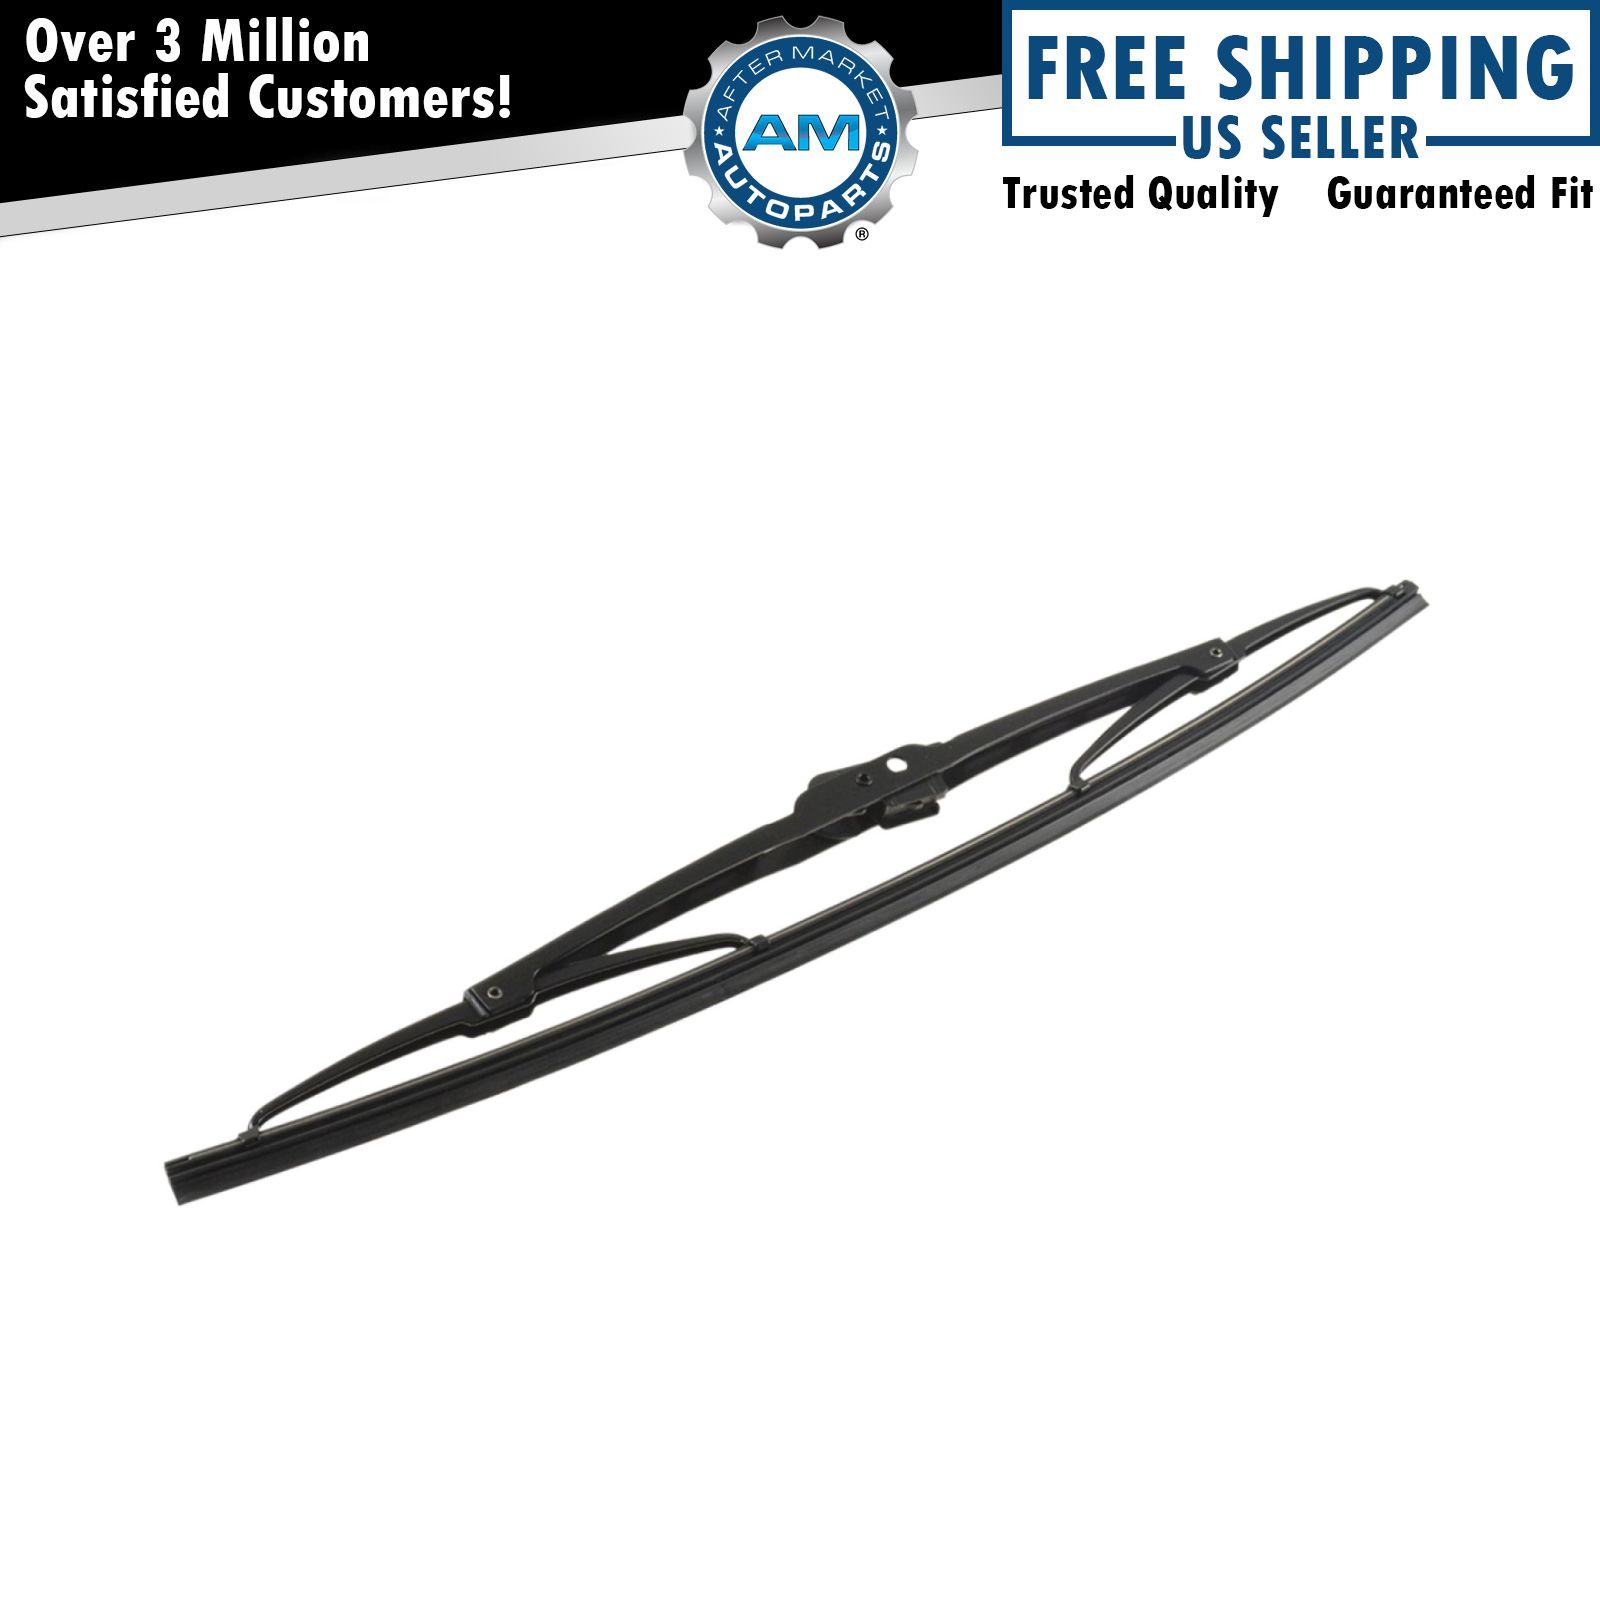 OEM Mopar 1AMWC016AA Wiper Blade 16" for Dodge Chrysler | eBay 2003 Chrysler Town And Country Wiper Blade Size